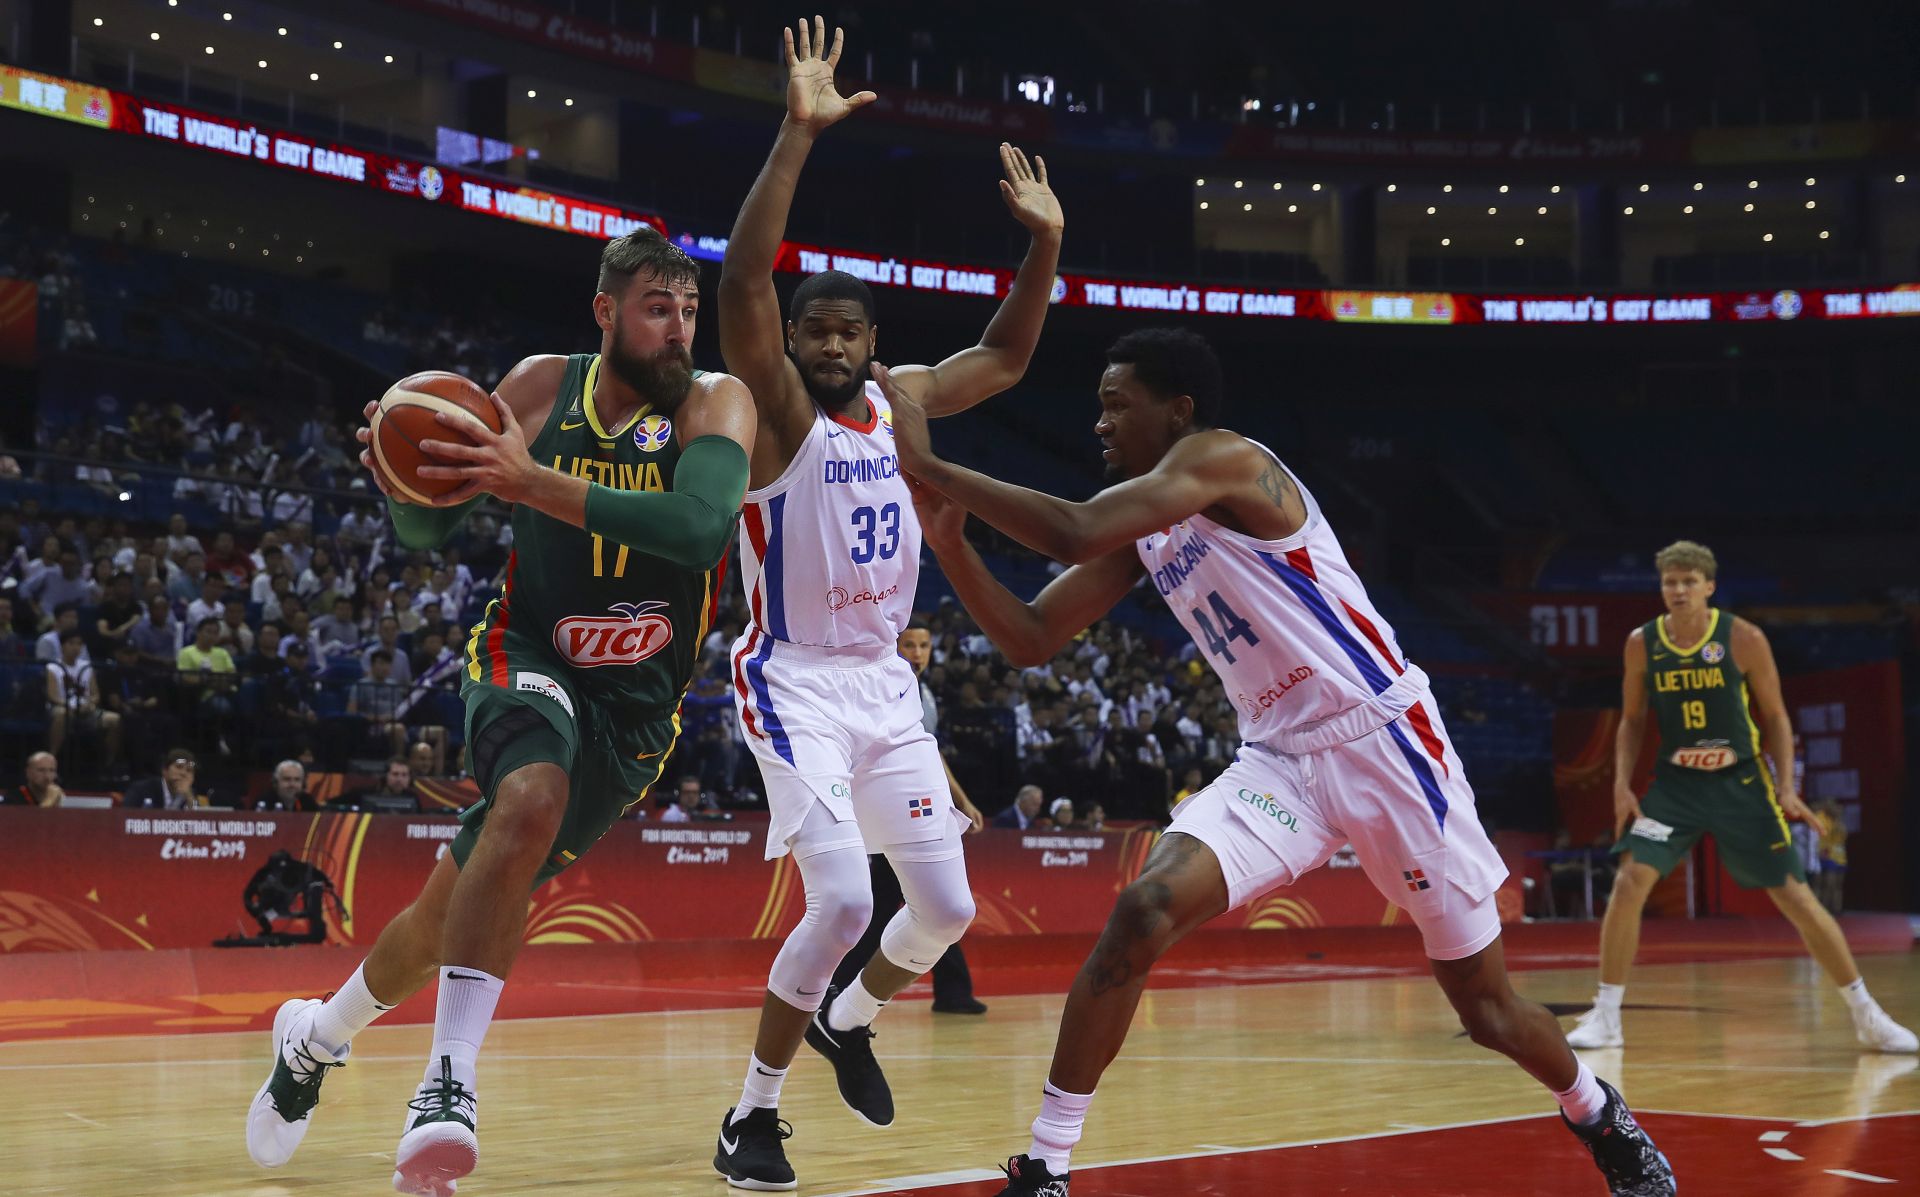 epa07829454 Jonas Valanciunas (L) of  Lithuania in action against Dominican Republic players during the FIBA Basketball World Cup 2019 match between Dominican Republic and Lithuania in Nanjing, China, 09 September 2019.  EPA/FAZRY ISMAIL